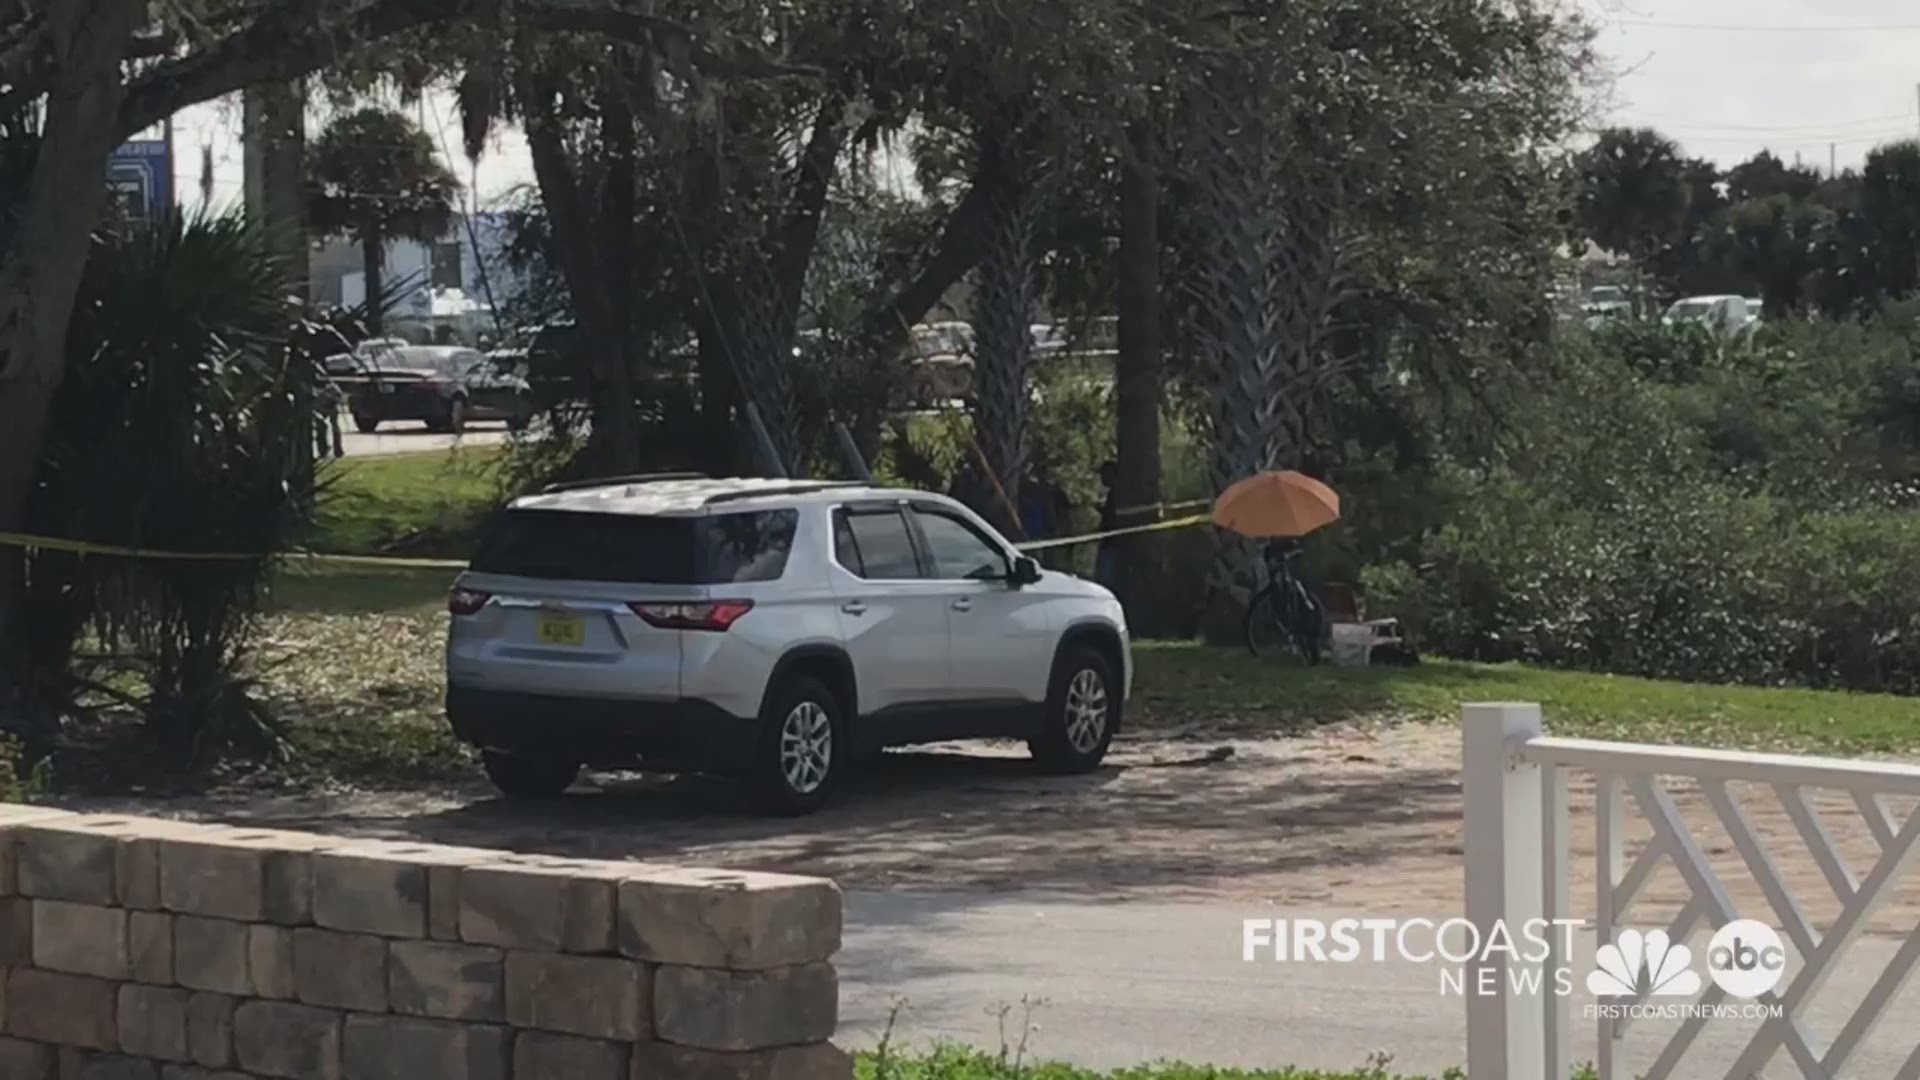 Residents are being asked to avoid the area of Oyster Creek as police investigate,according to the St. Augustine Police Department.